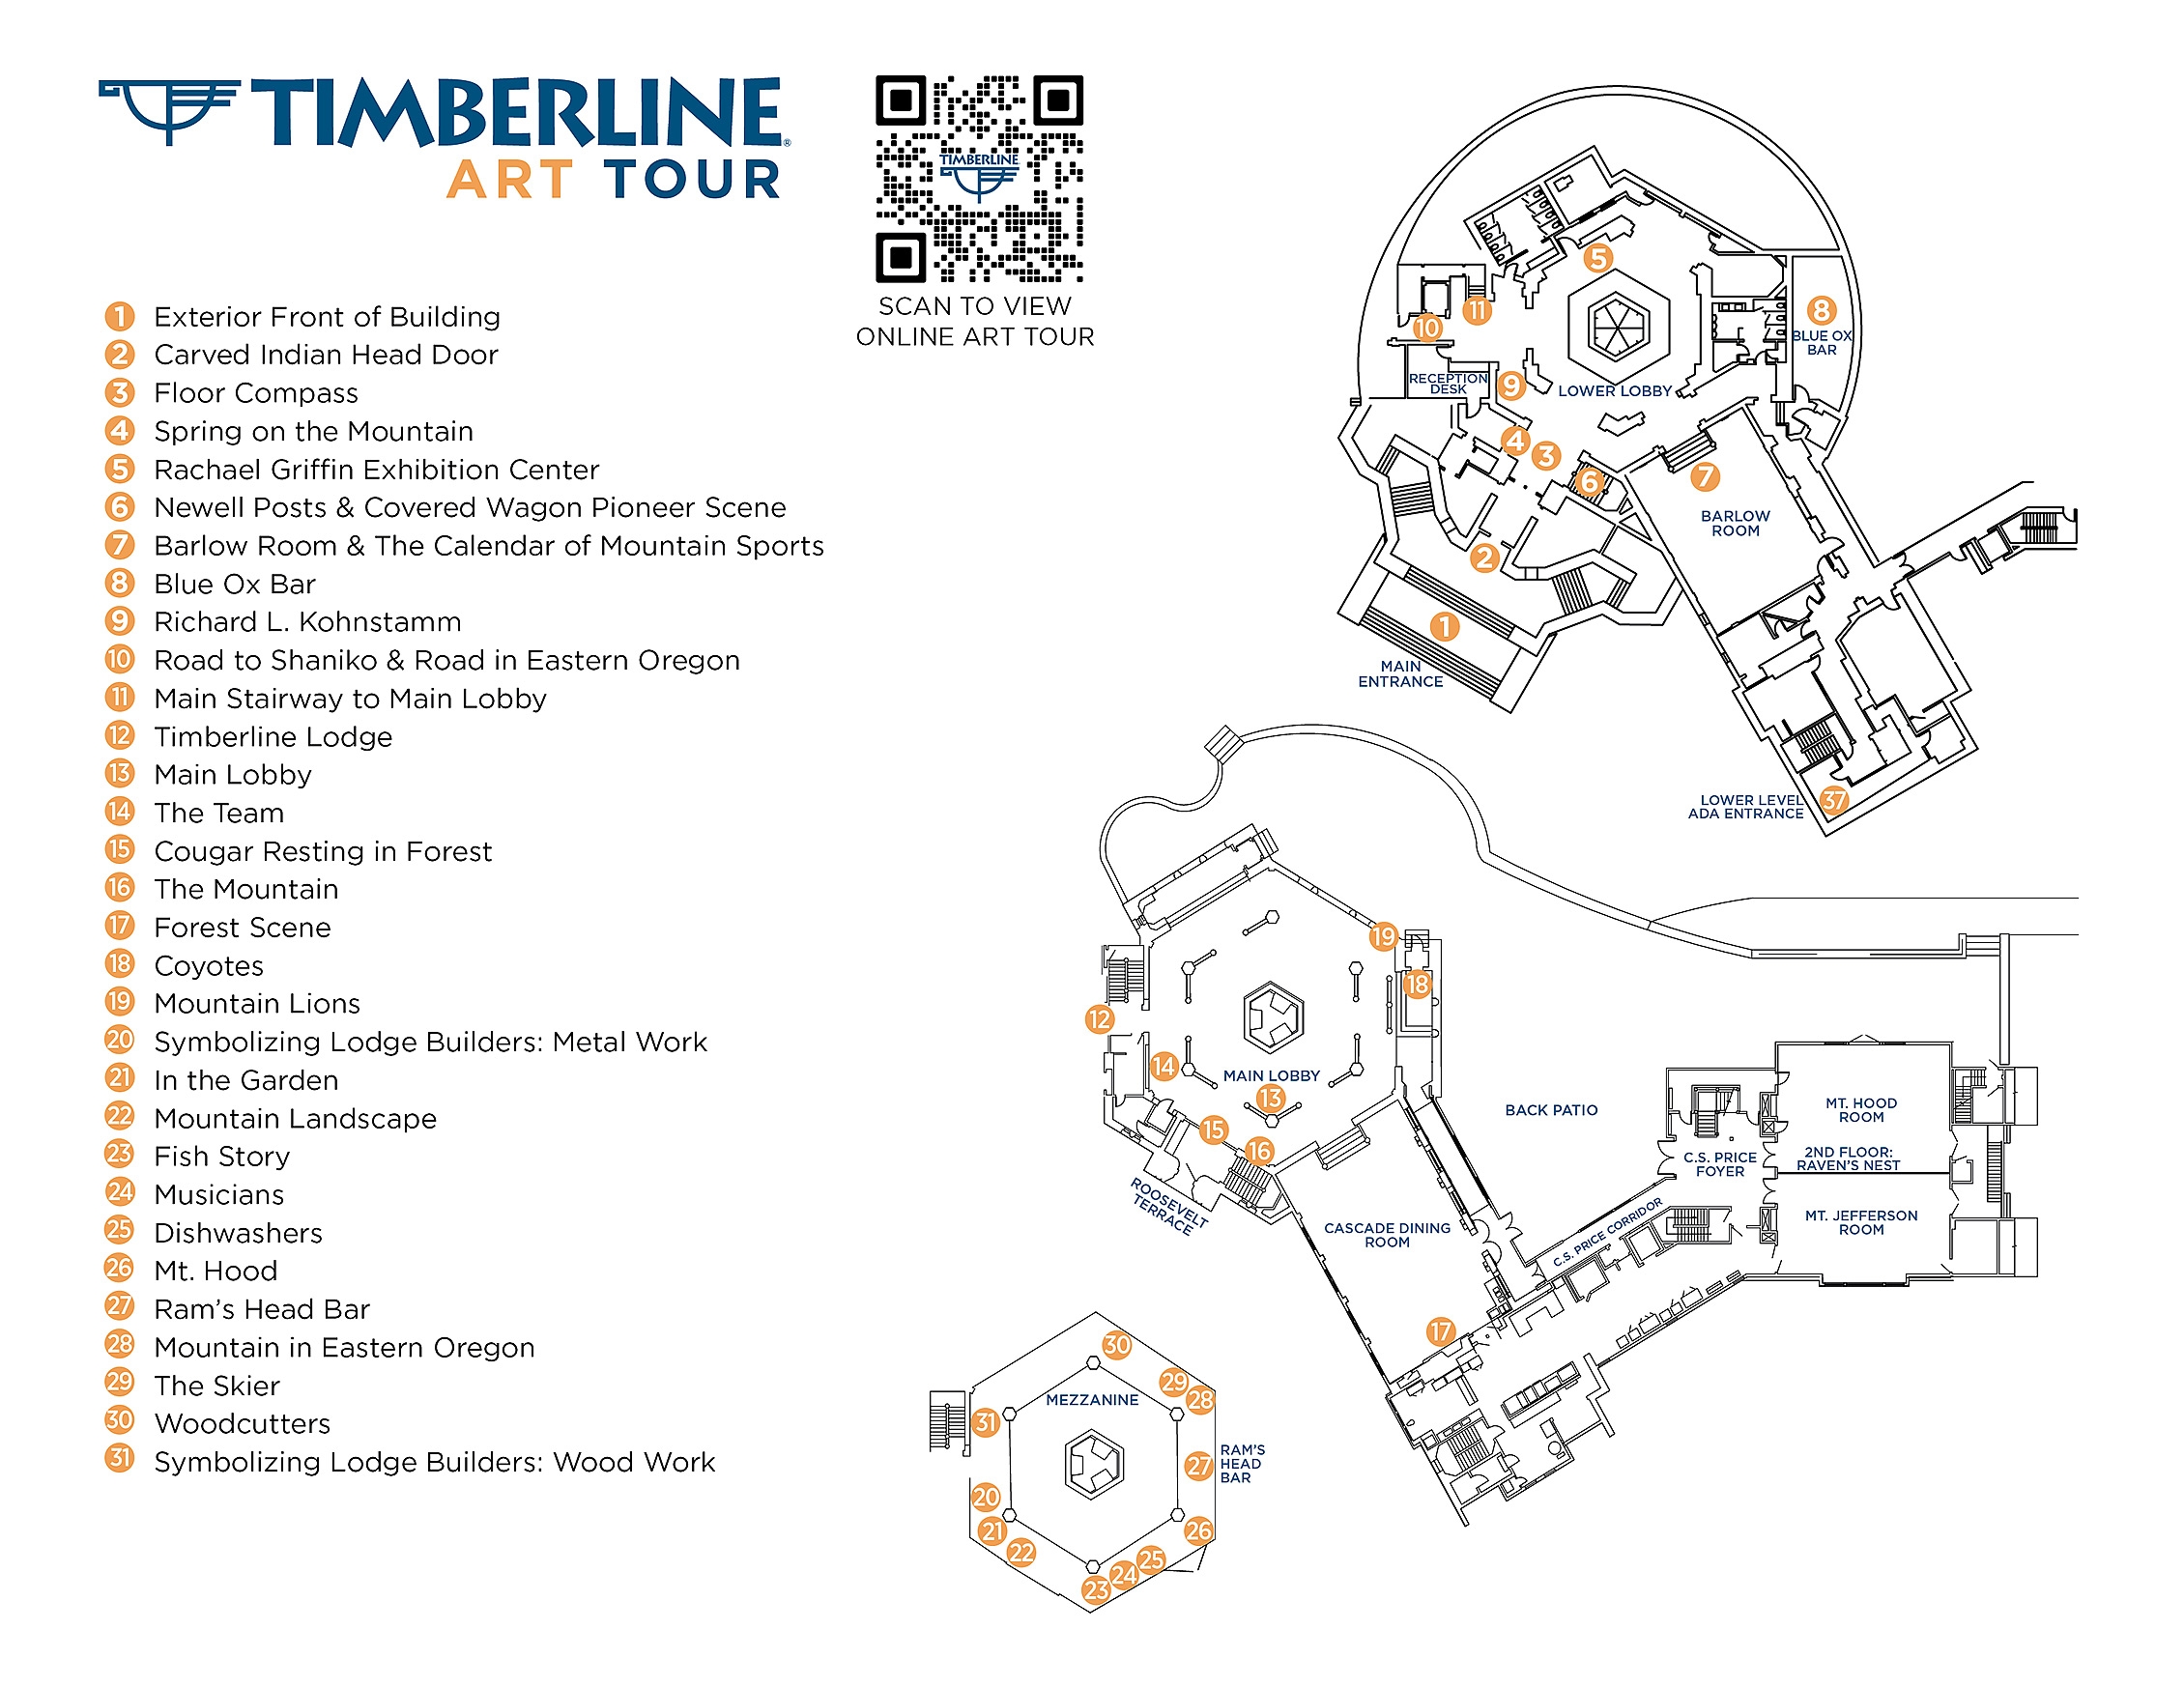 DIAGRAM OF TIMBERLINE LODGE AND LOCATIONS OF ART WORKS